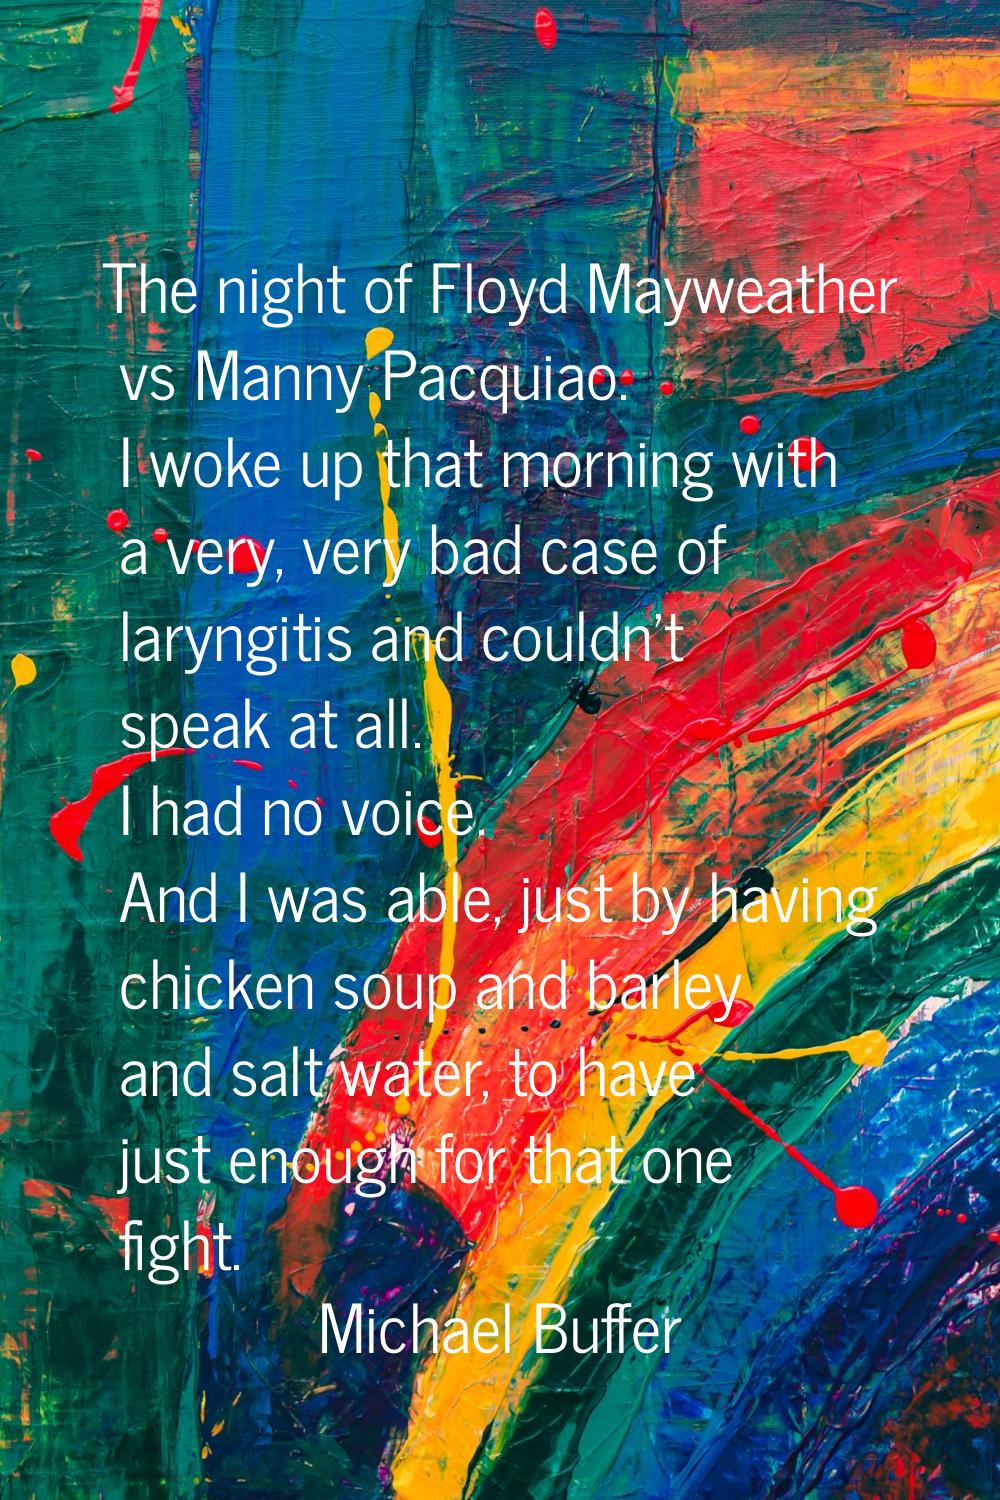 The night of Floyd Mayweather vs Manny Pacquiao. I woke up that morning with a very, very bad case 